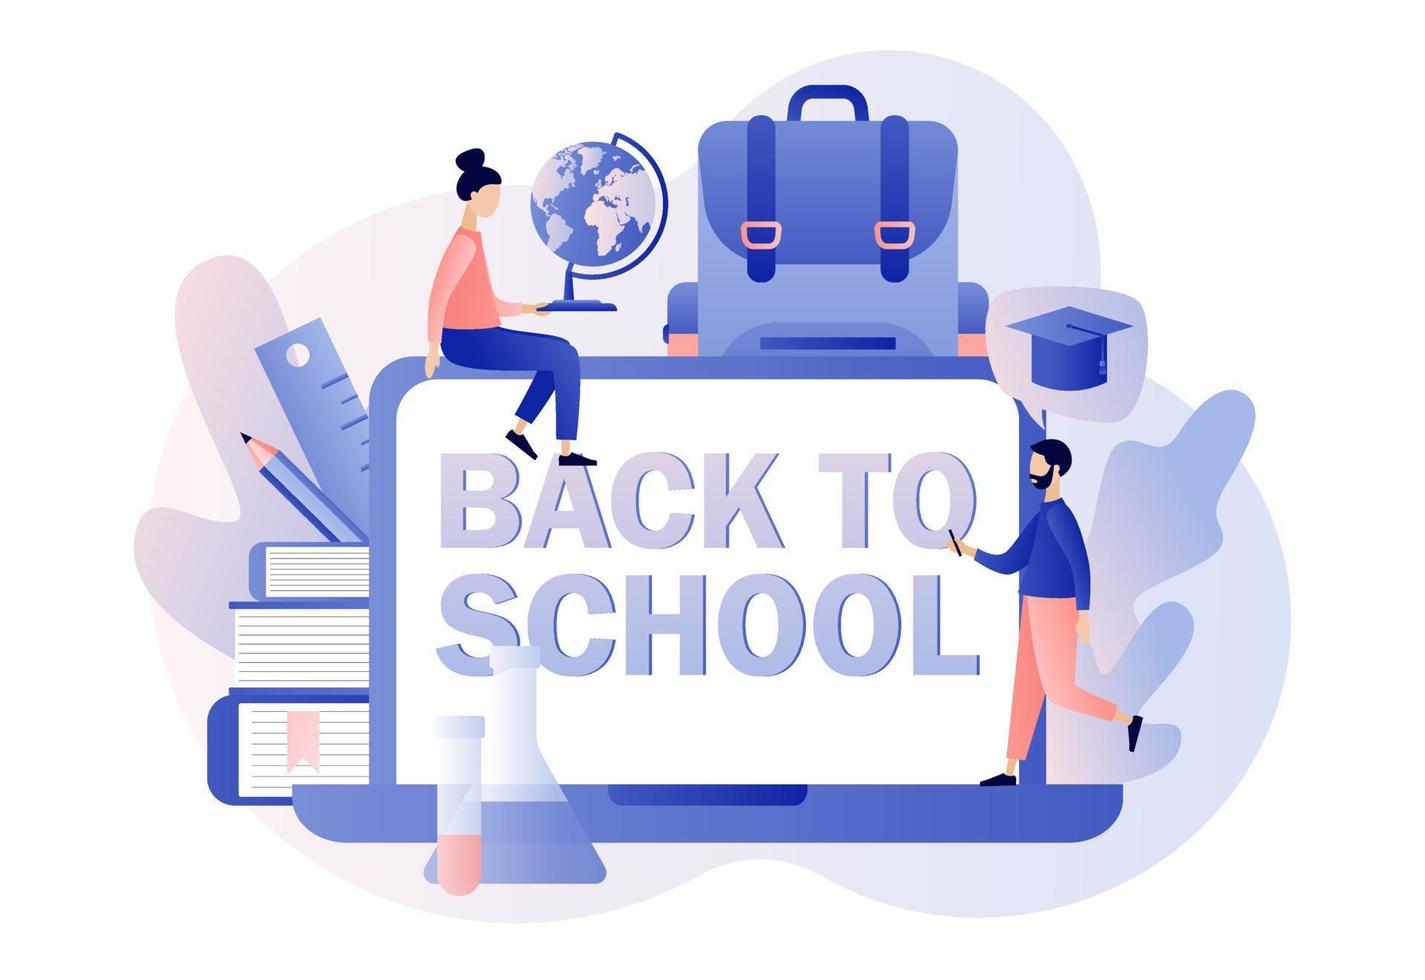 Back to School. Tiny people with laptop, backpack, educational tools, calculator, school stationery, globe and books. Online education concept. Modern flat cartoon style. Vector illustration